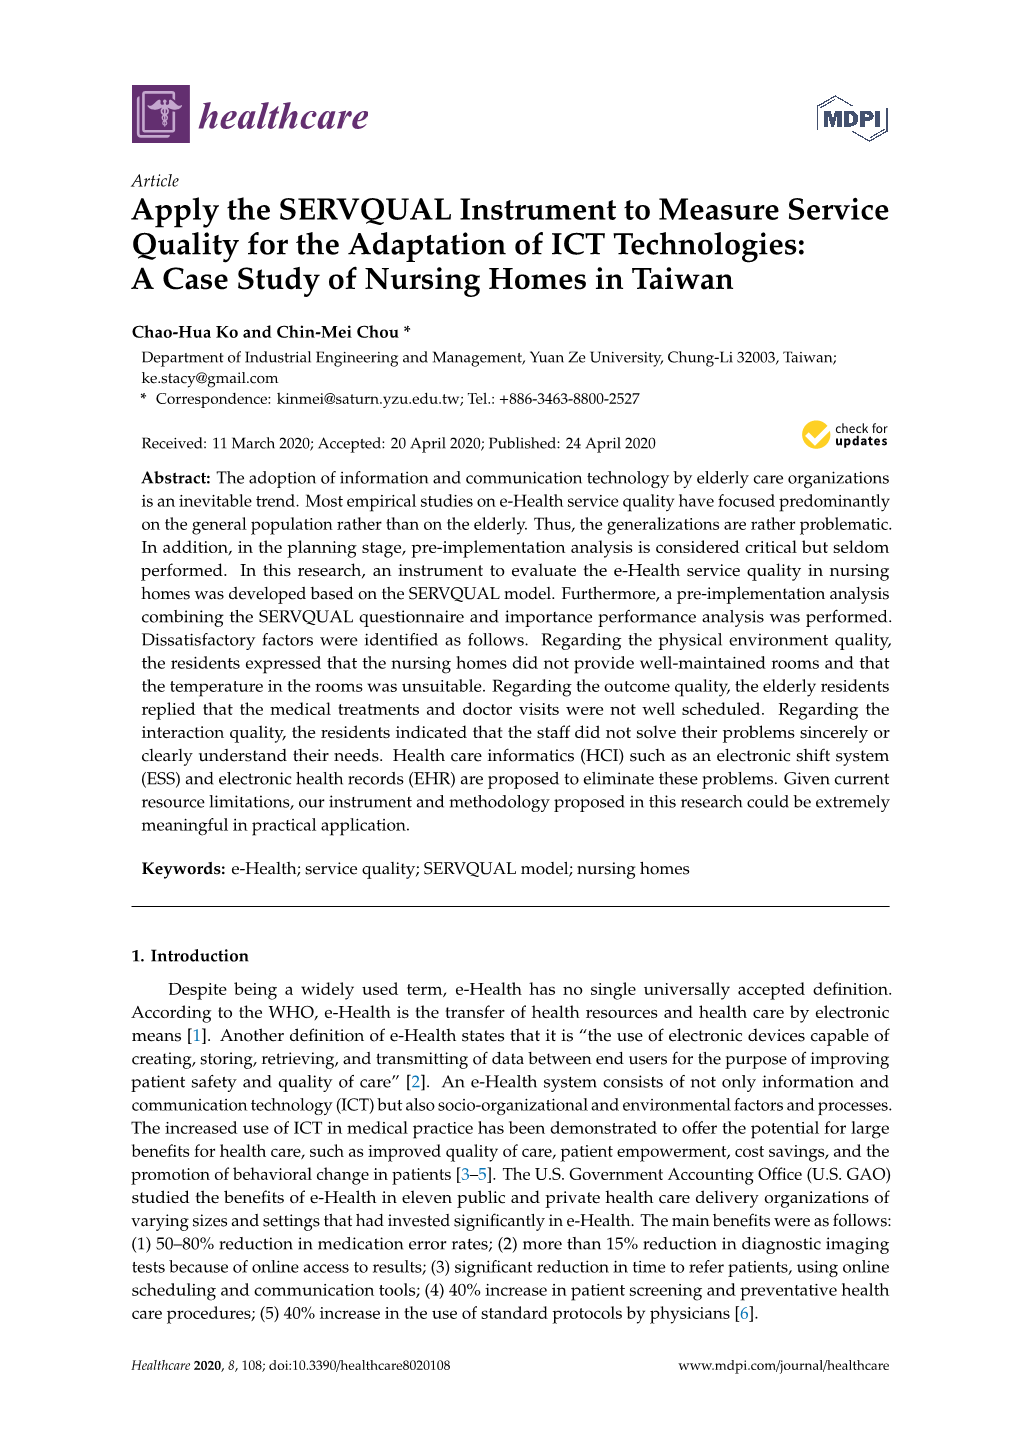 Apply the SERVQUAL Instrument to Measure Service Quality for the Adaptation of ICT Technologies: a Case Study of Nursing Homes in Taiwan